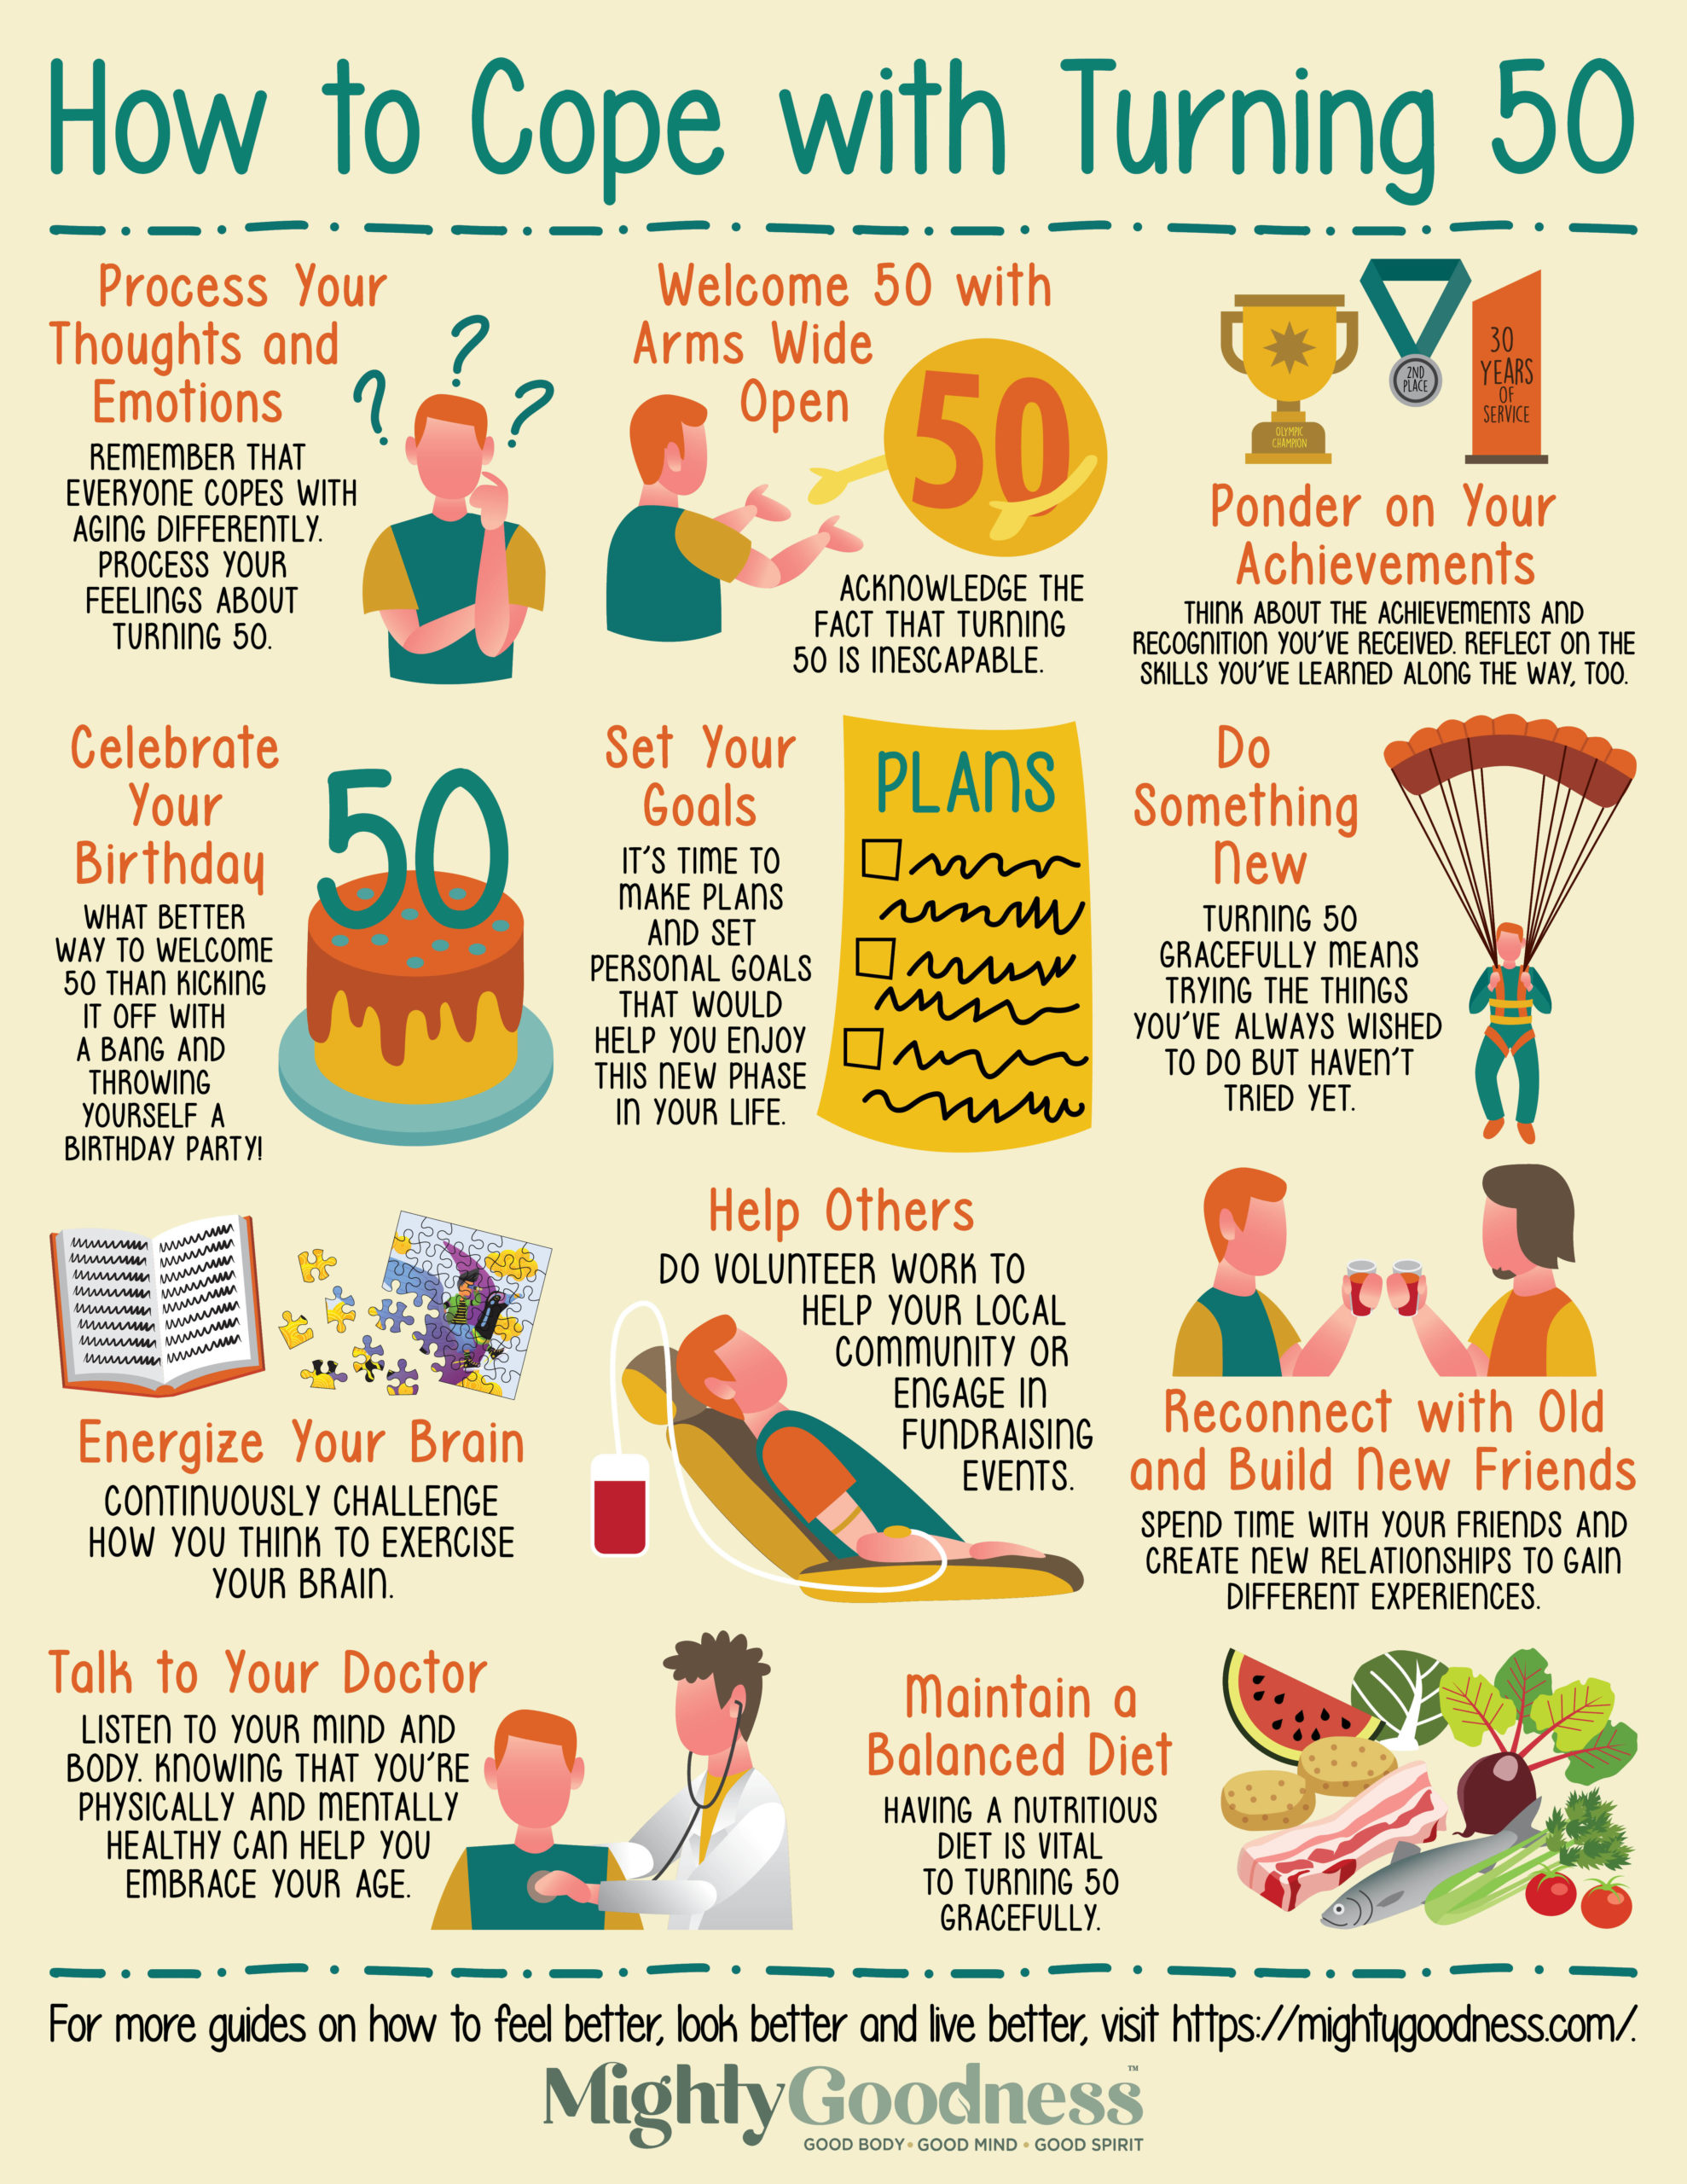 How to Cope with Turning 50